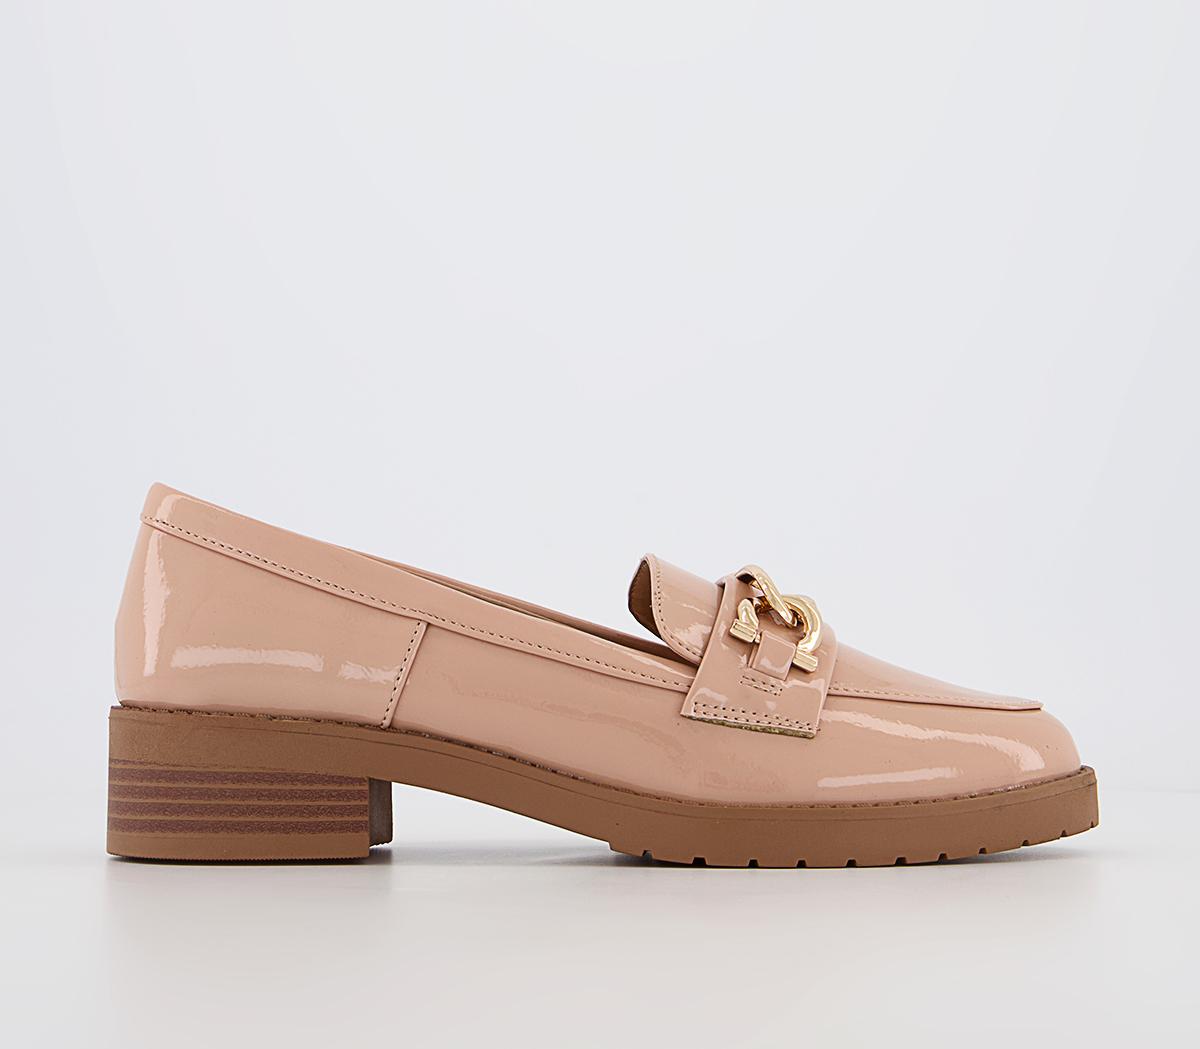 OFFICEFebe Trim Cleat Sole LoafersBeige